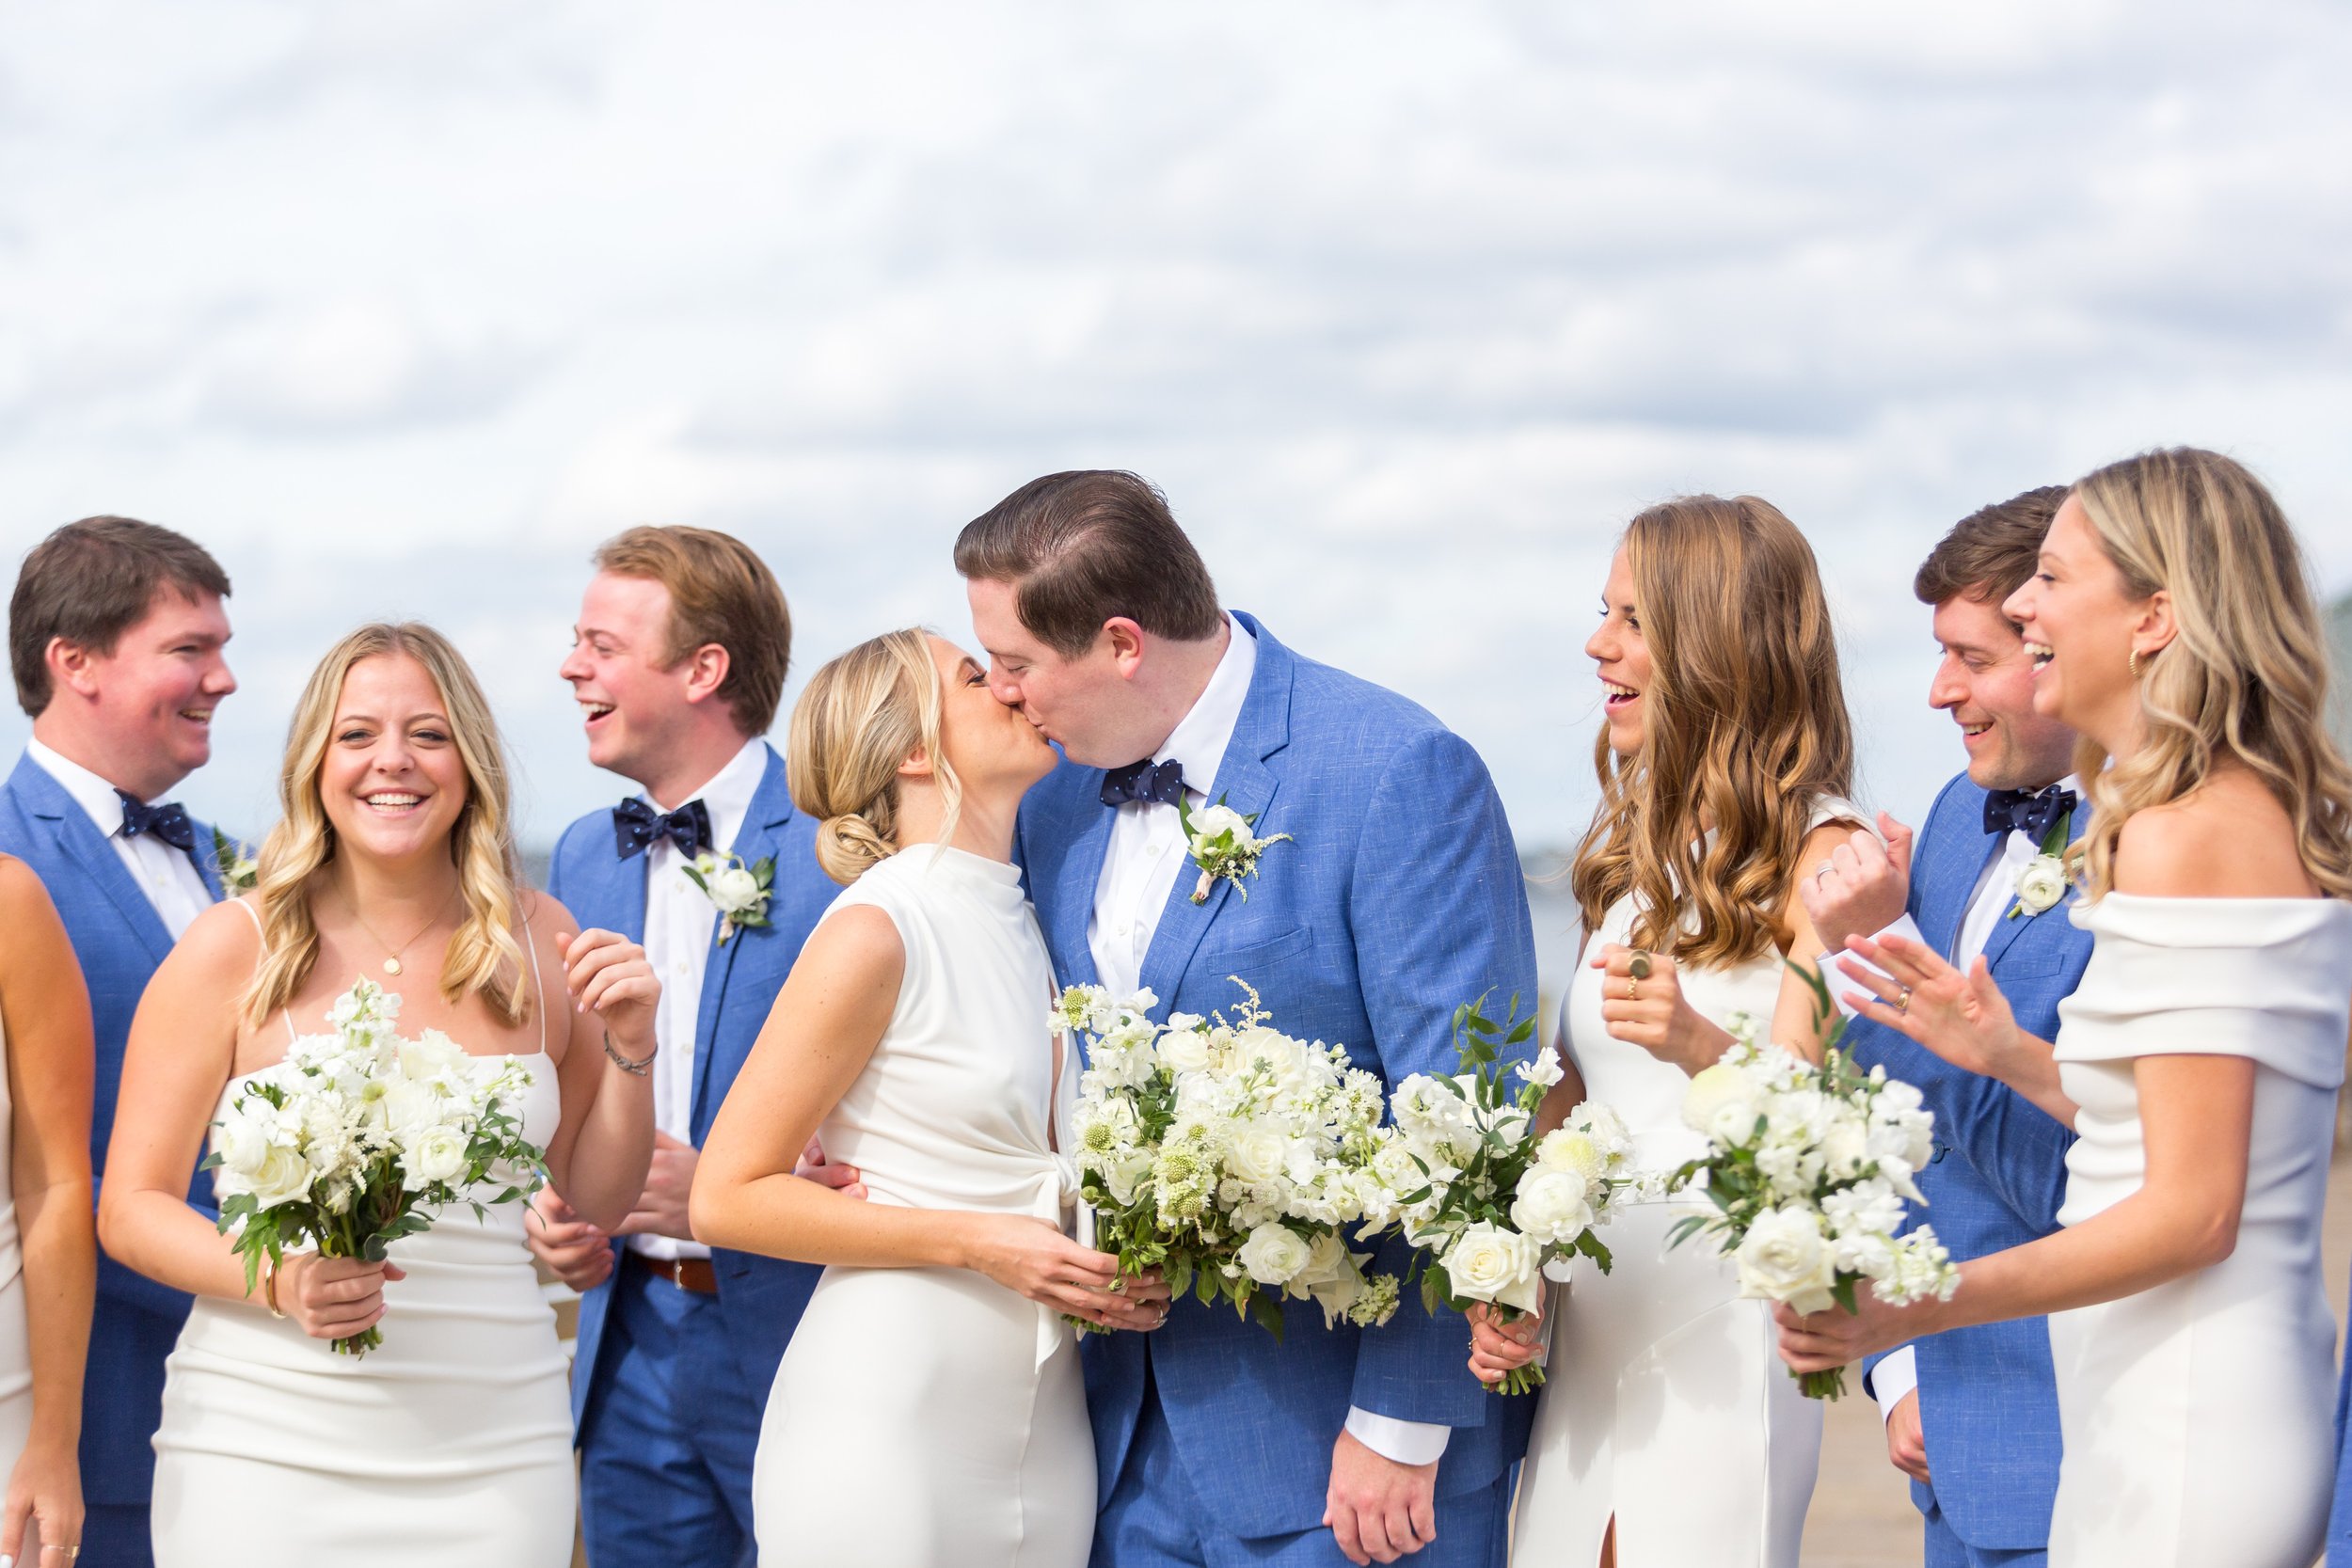 Bride and groom kiss while wedding party cheers